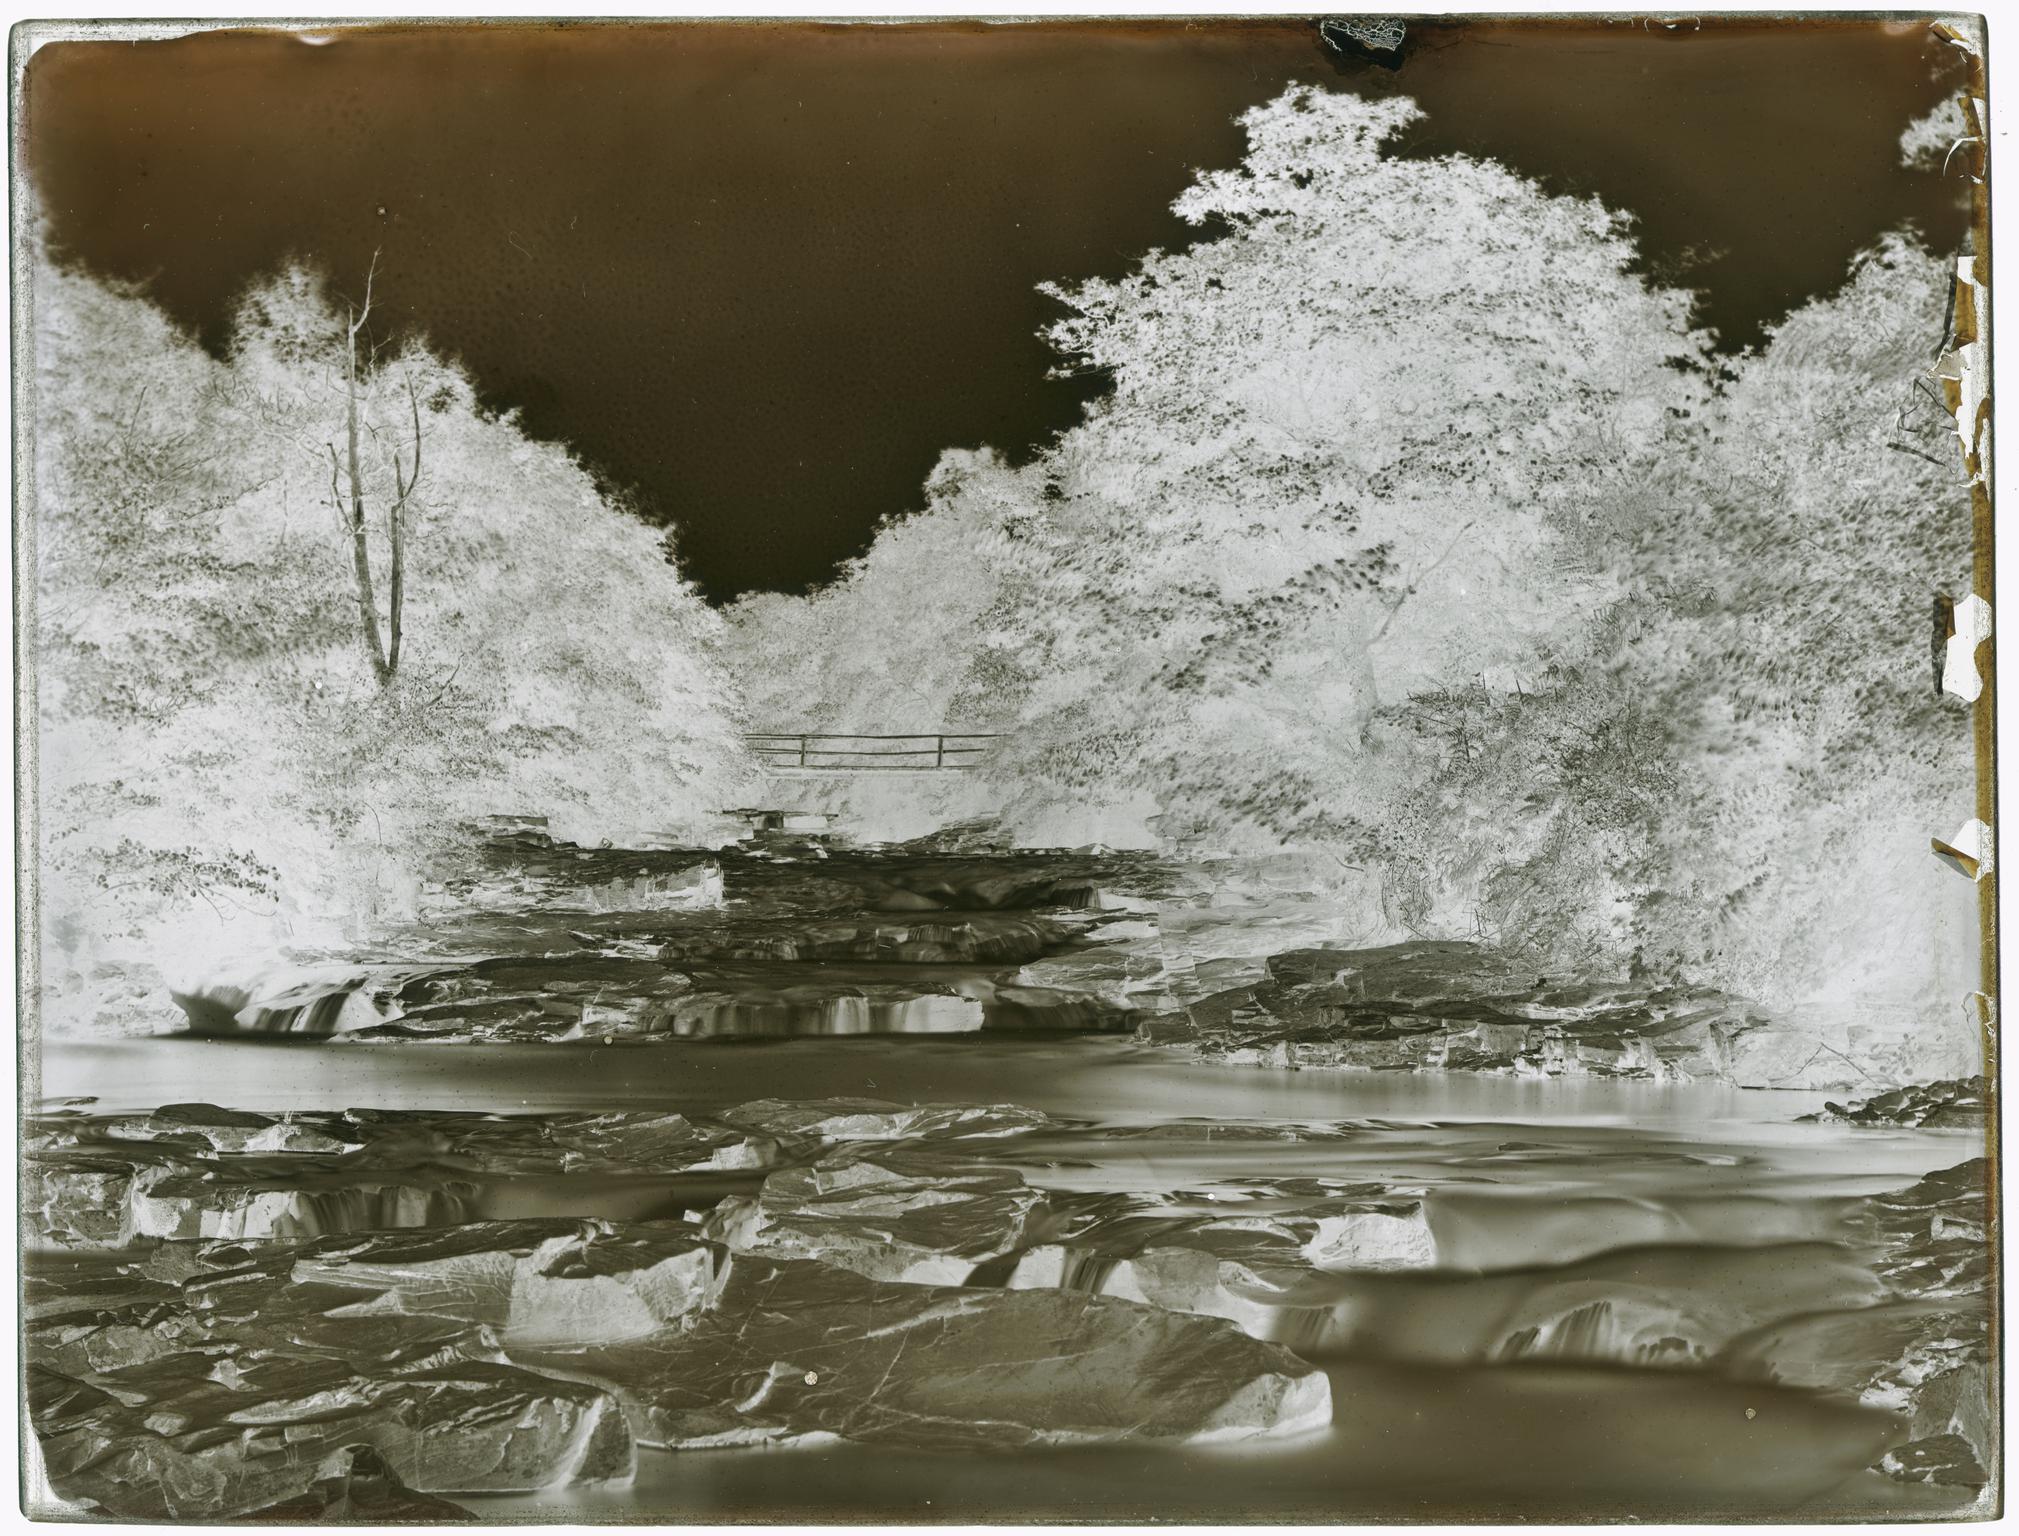 Rapids on the Dulais, Neath Valley, glass negative